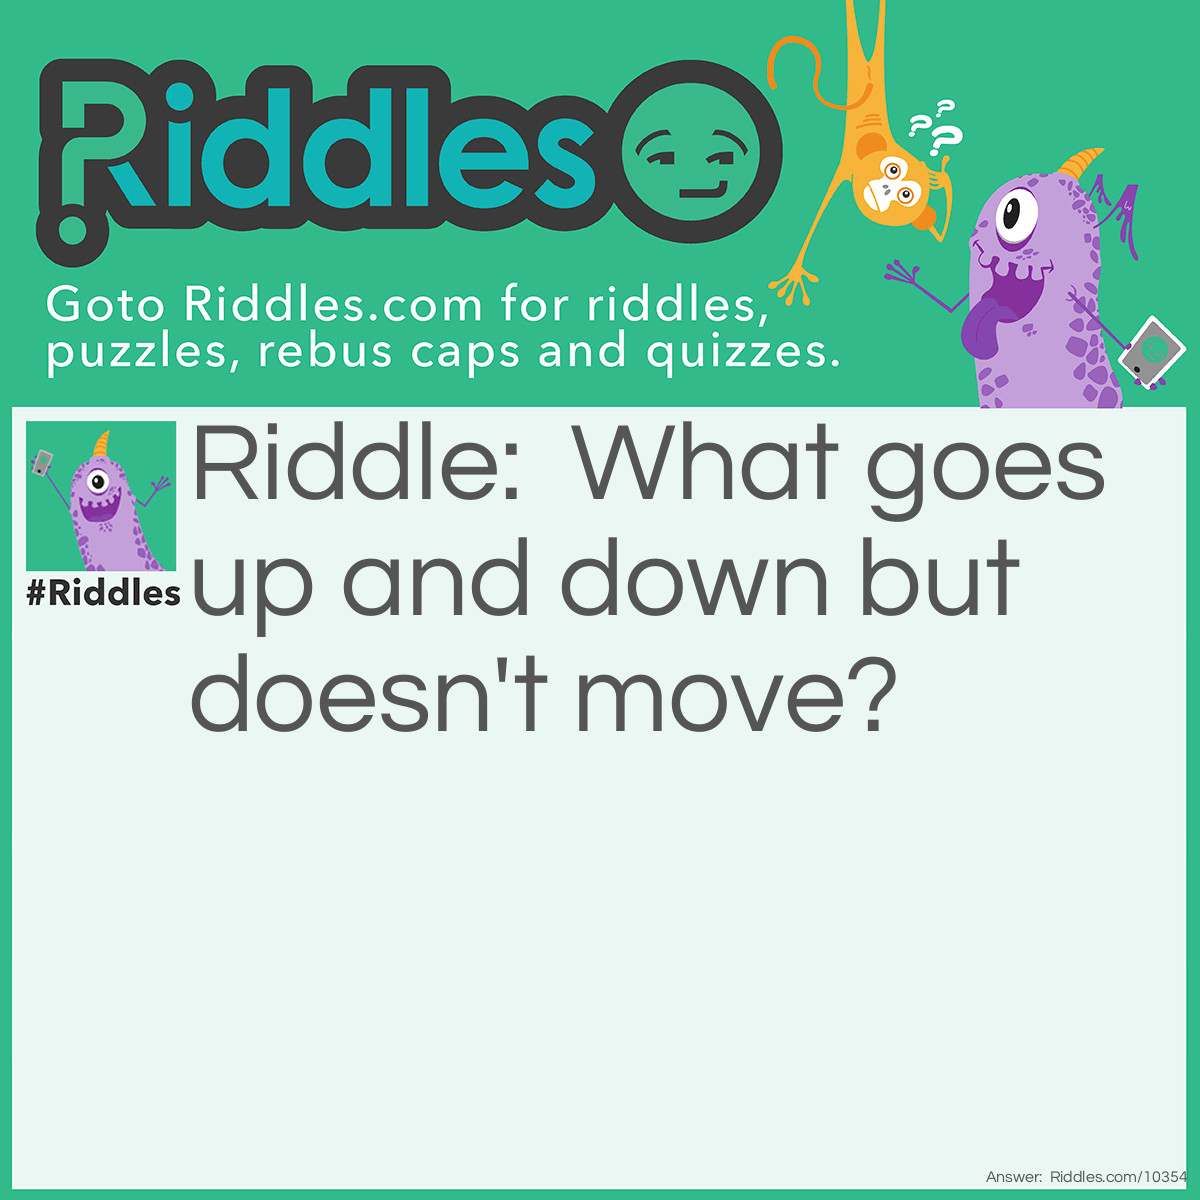 Riddle: What goes up and down but doesn't move? Answer: A staircase or a lift